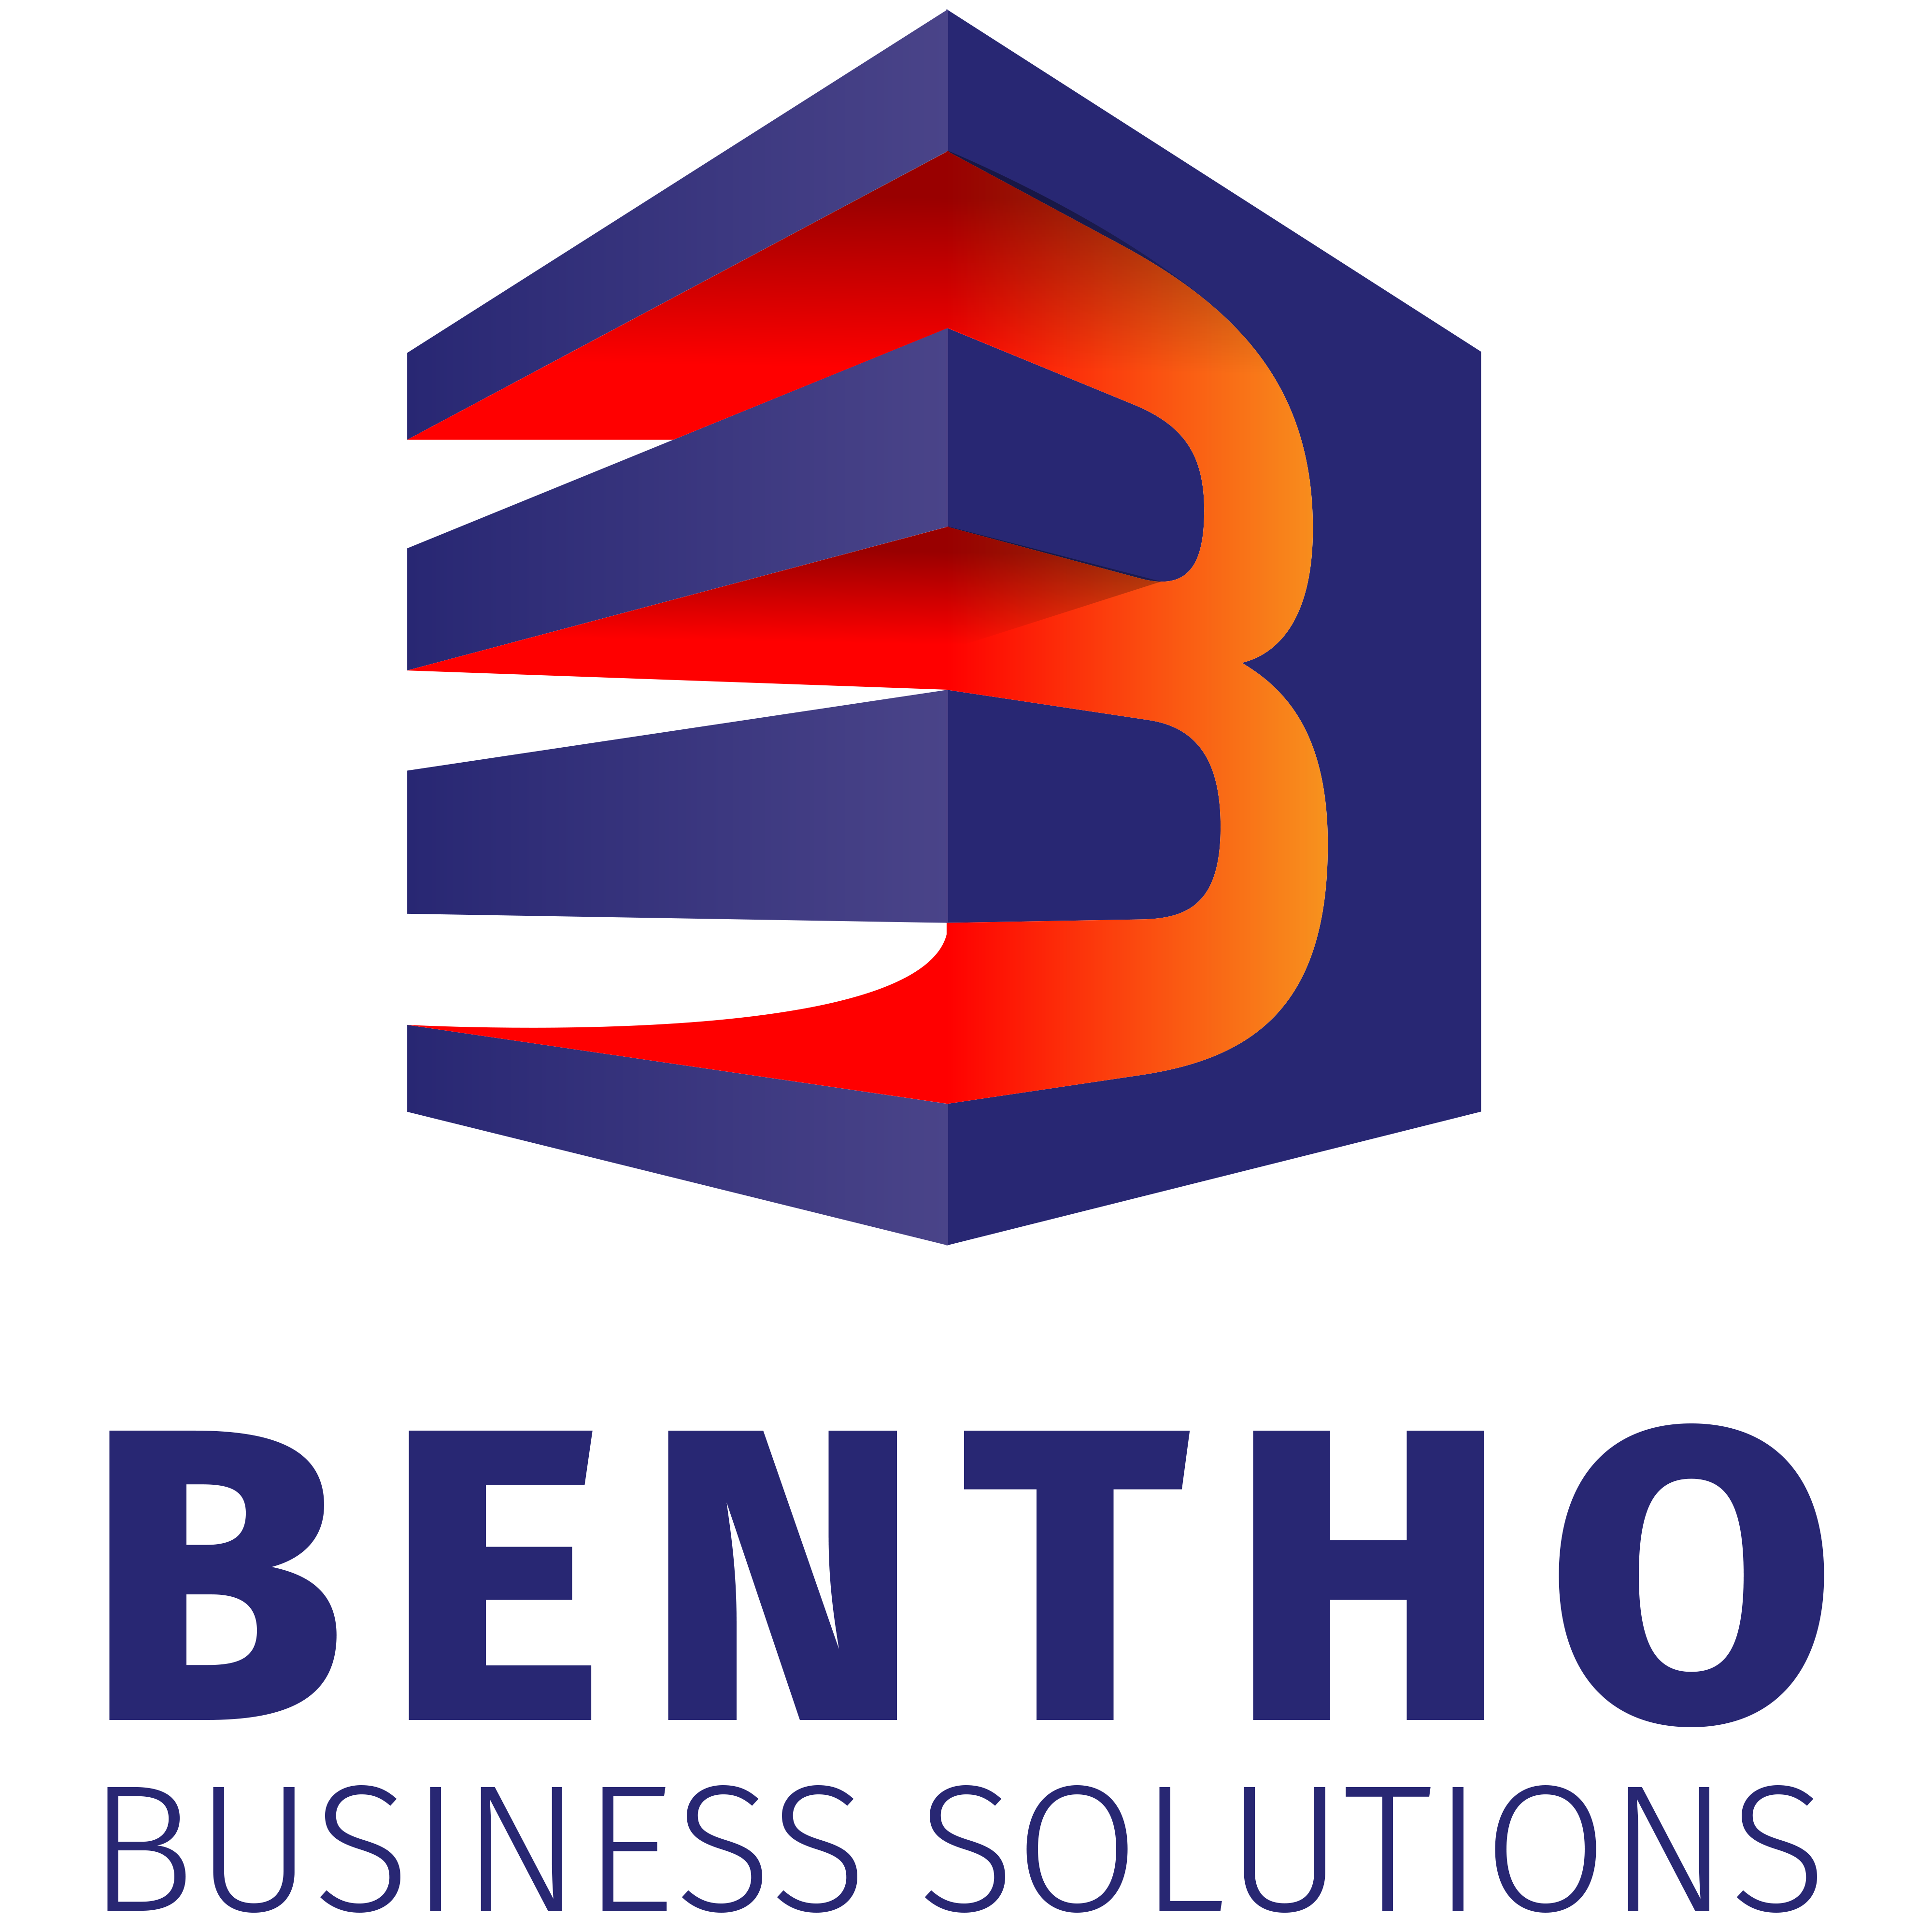 BENTHO Business-Solutions